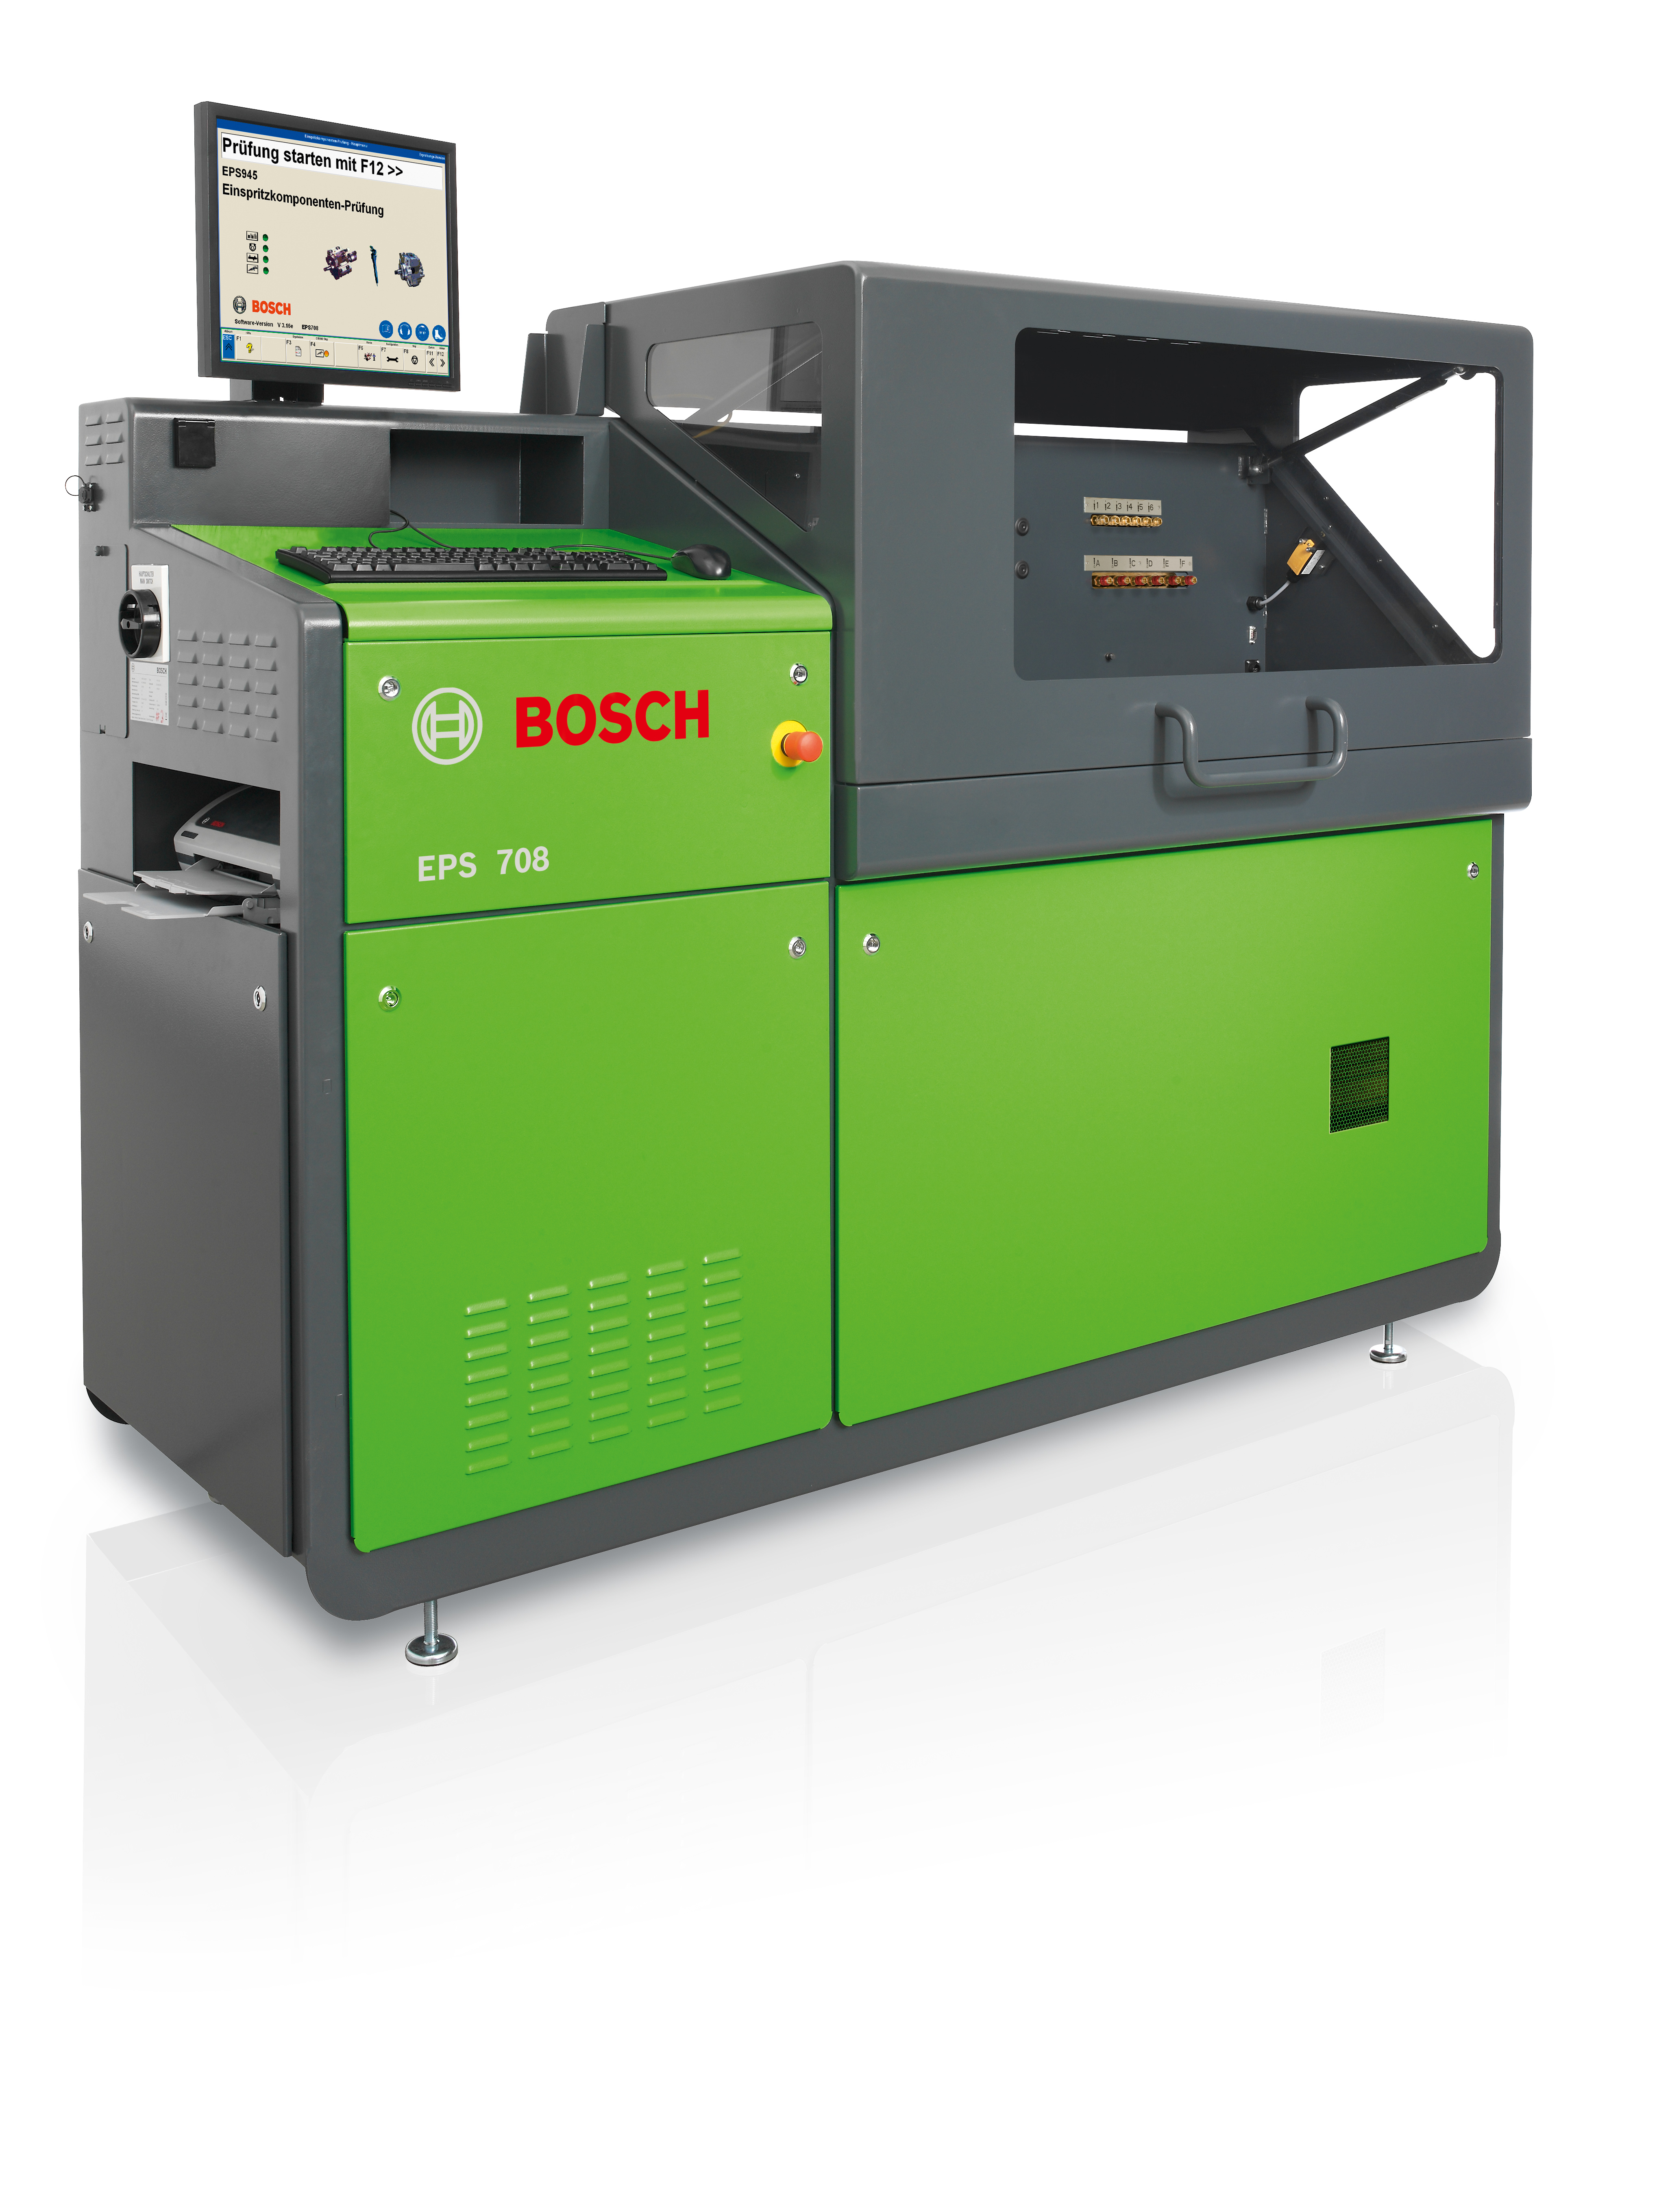 New Bosch Online Catalog For Diesel Test Benches Repair Tools And